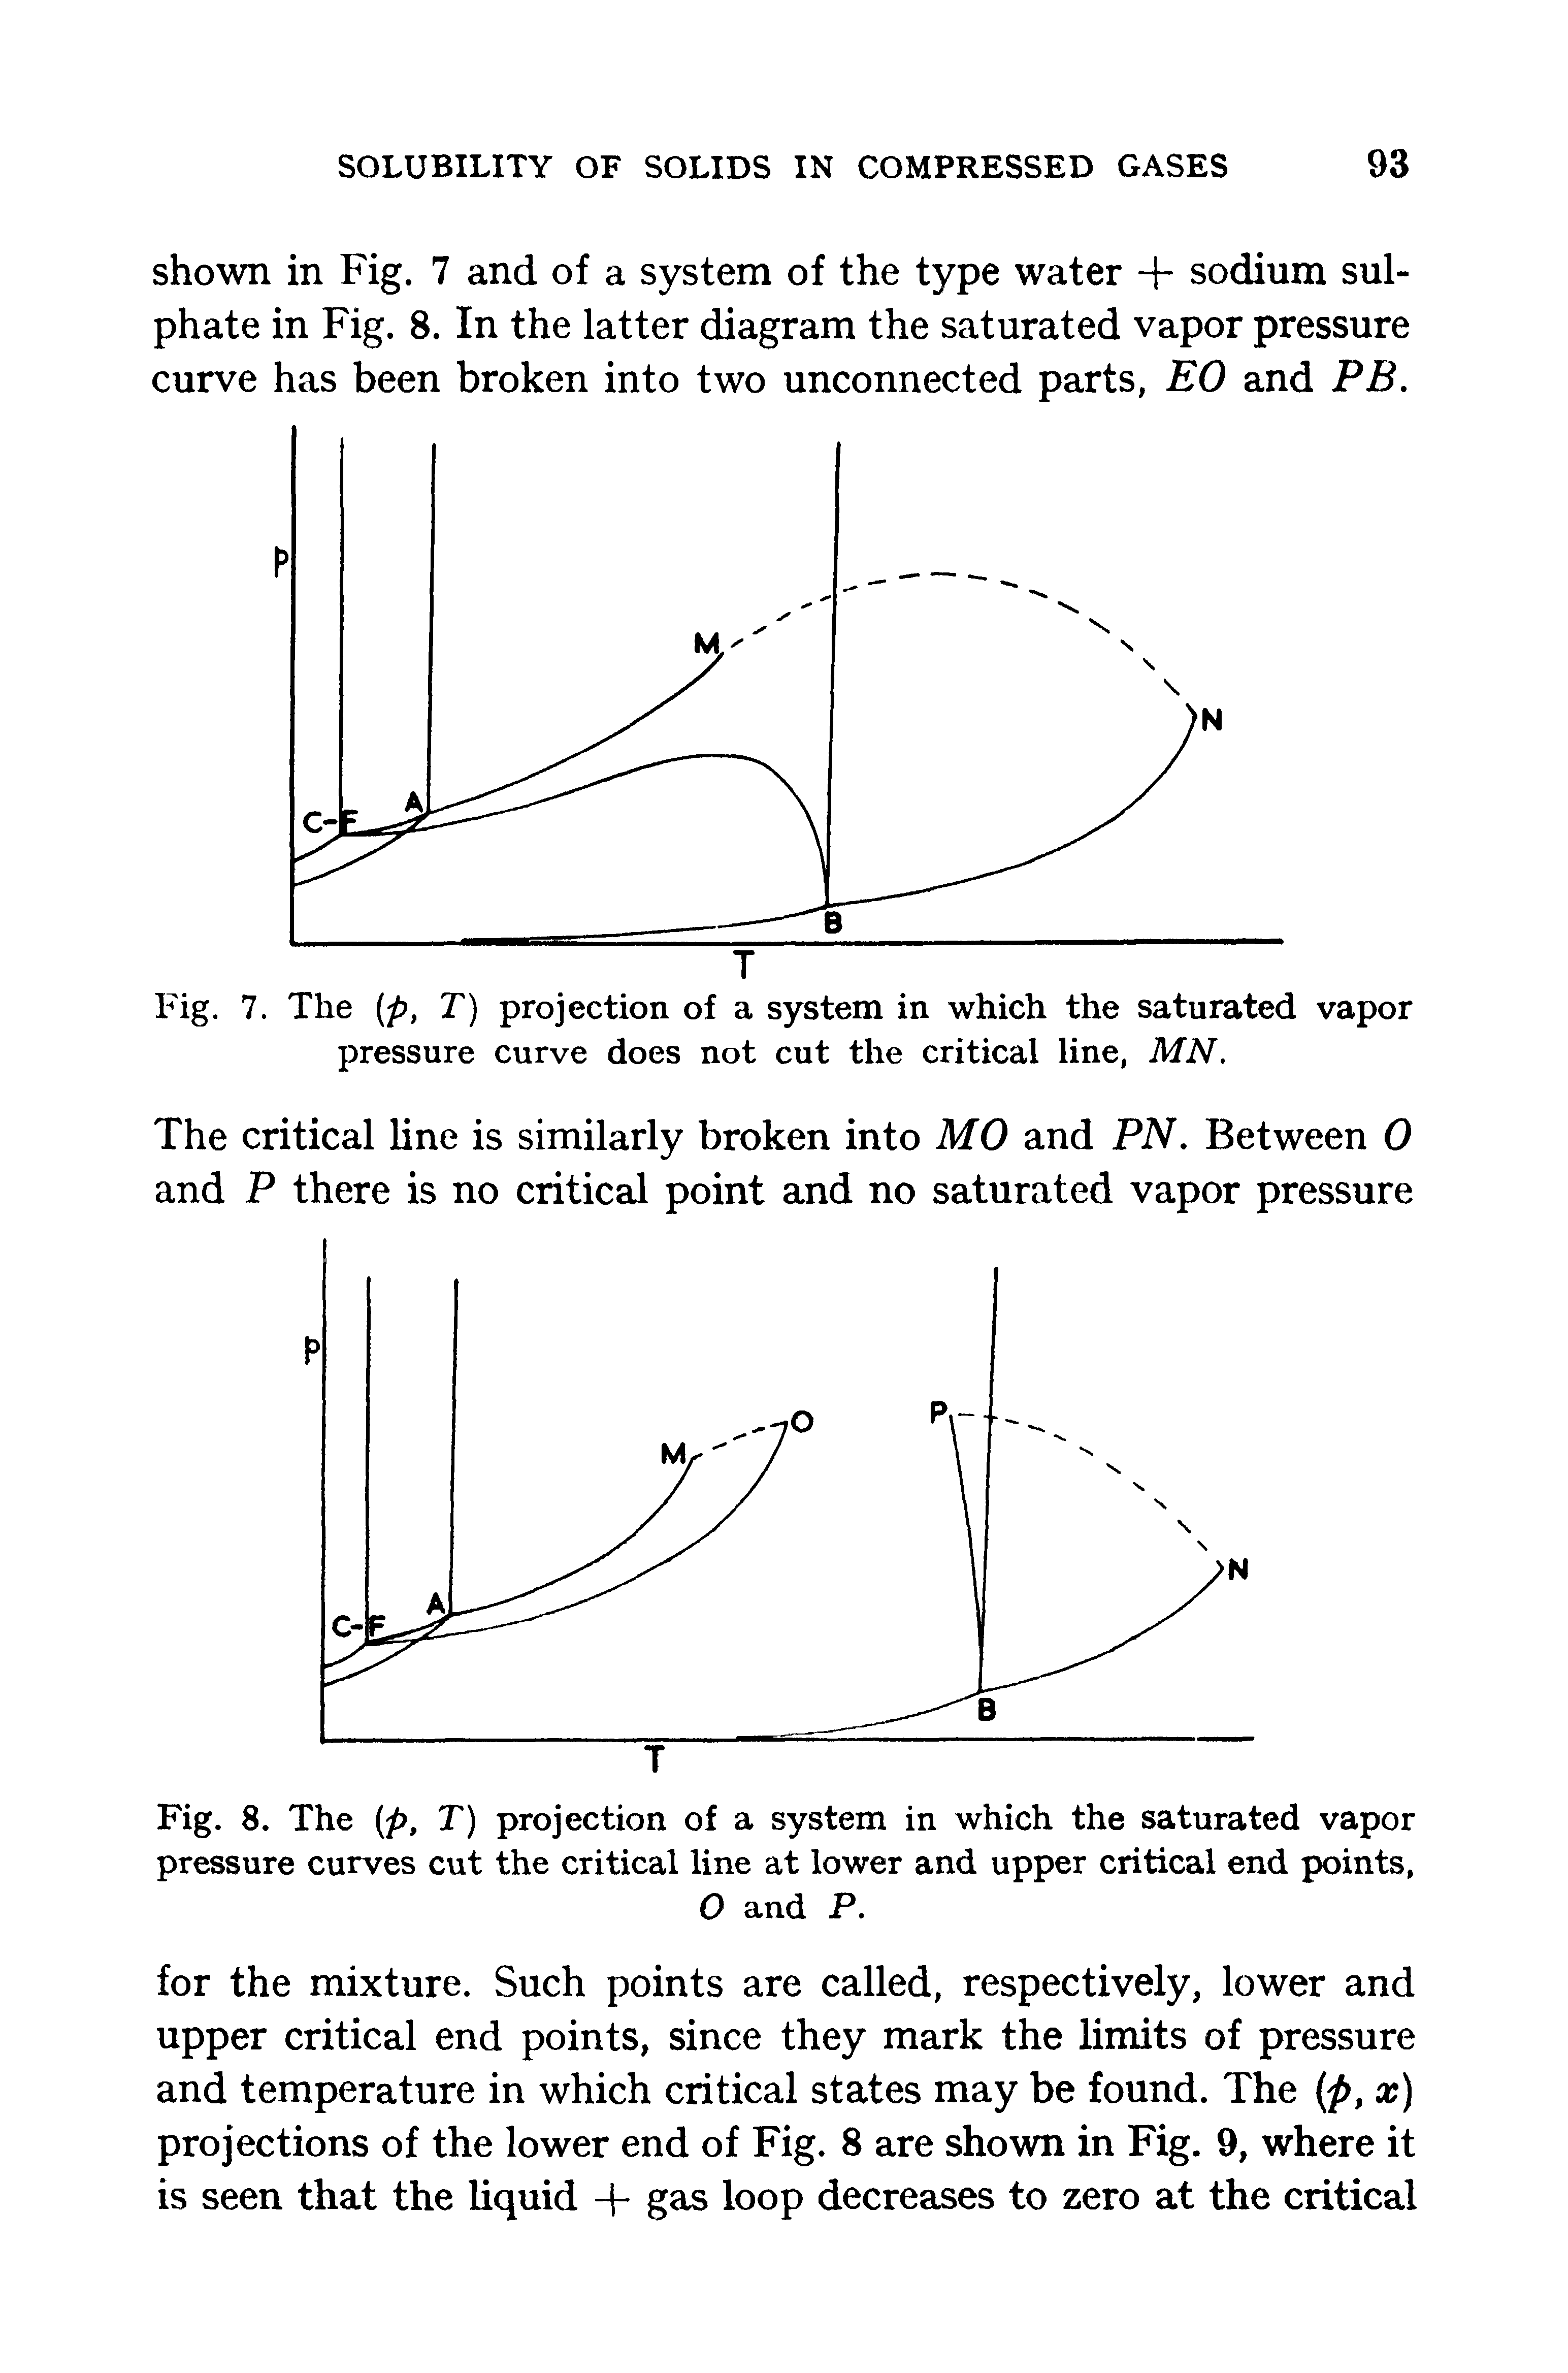 Fig. 8. The (p, T) projection of a system in which the saturated vapor pressure curves cut the critical line at lower and upper critical end points,...